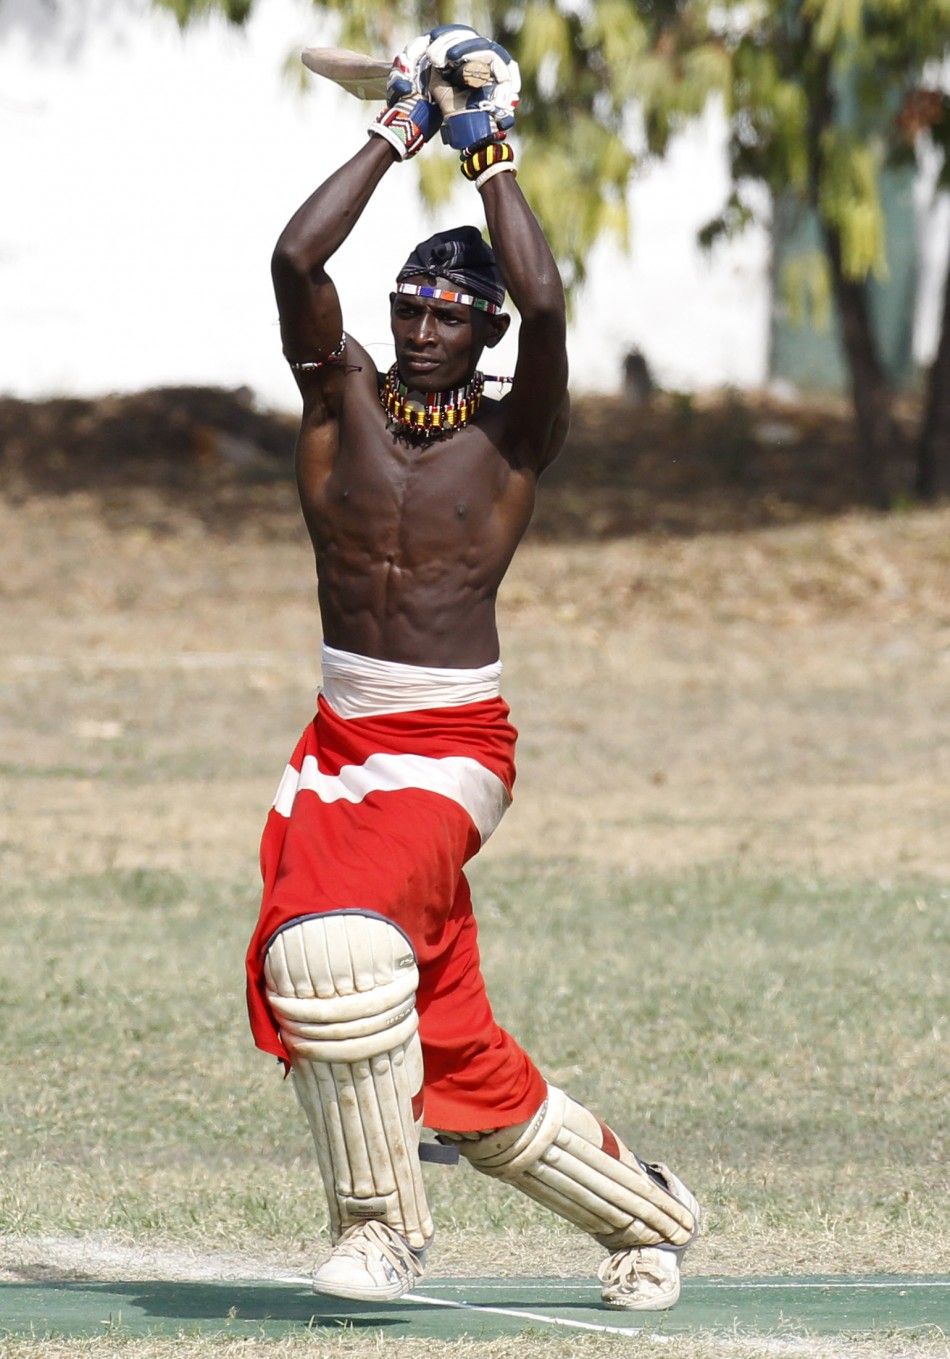 Olengais, captain of the Maasai Cricket Warriors, plays a shot during their friendly match in Mombasa